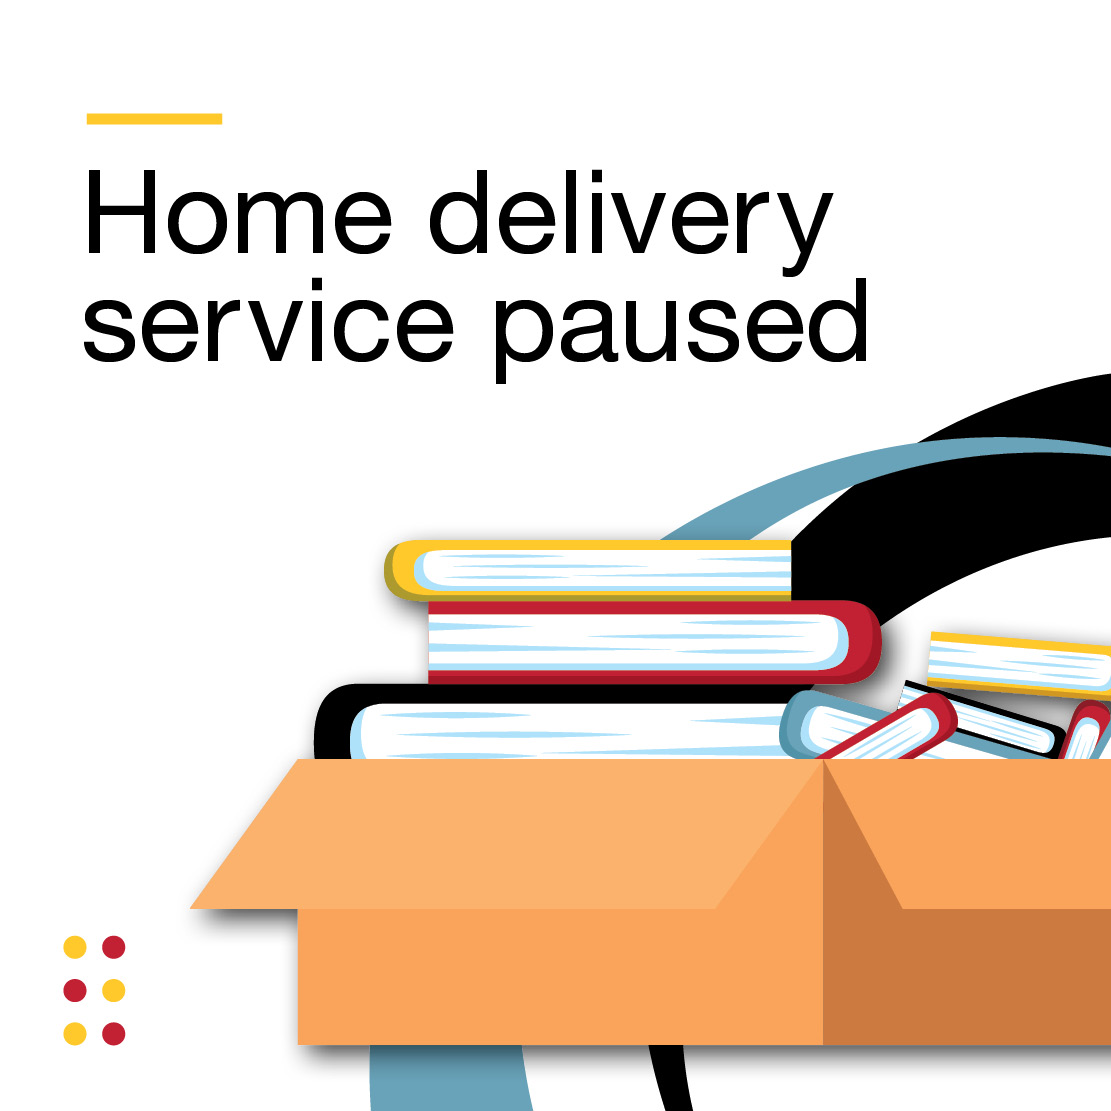 Home delivery service paused.